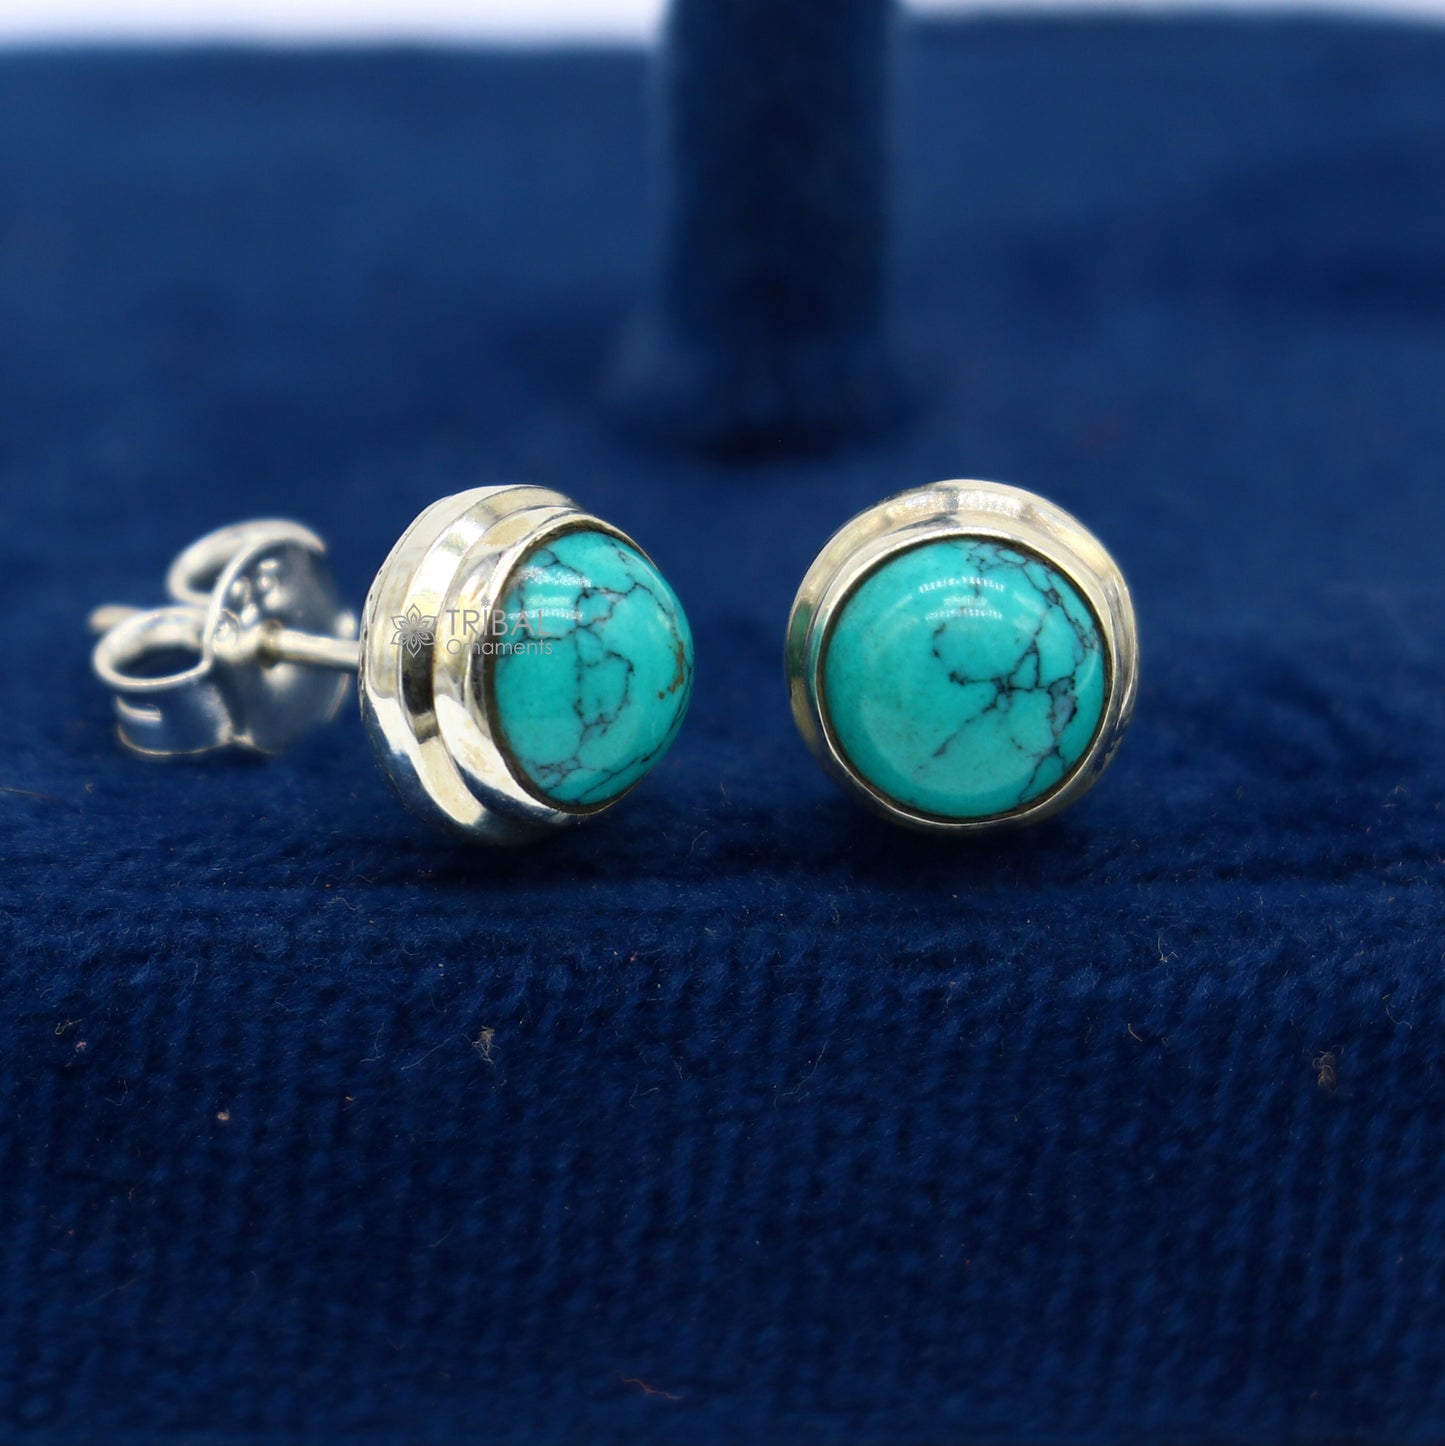 925 sterling silver handmade stud earring with gorgeous single blue turquoise stone stud earring best unisex jewelry s1276 - TRIBAL ORNAMENTS